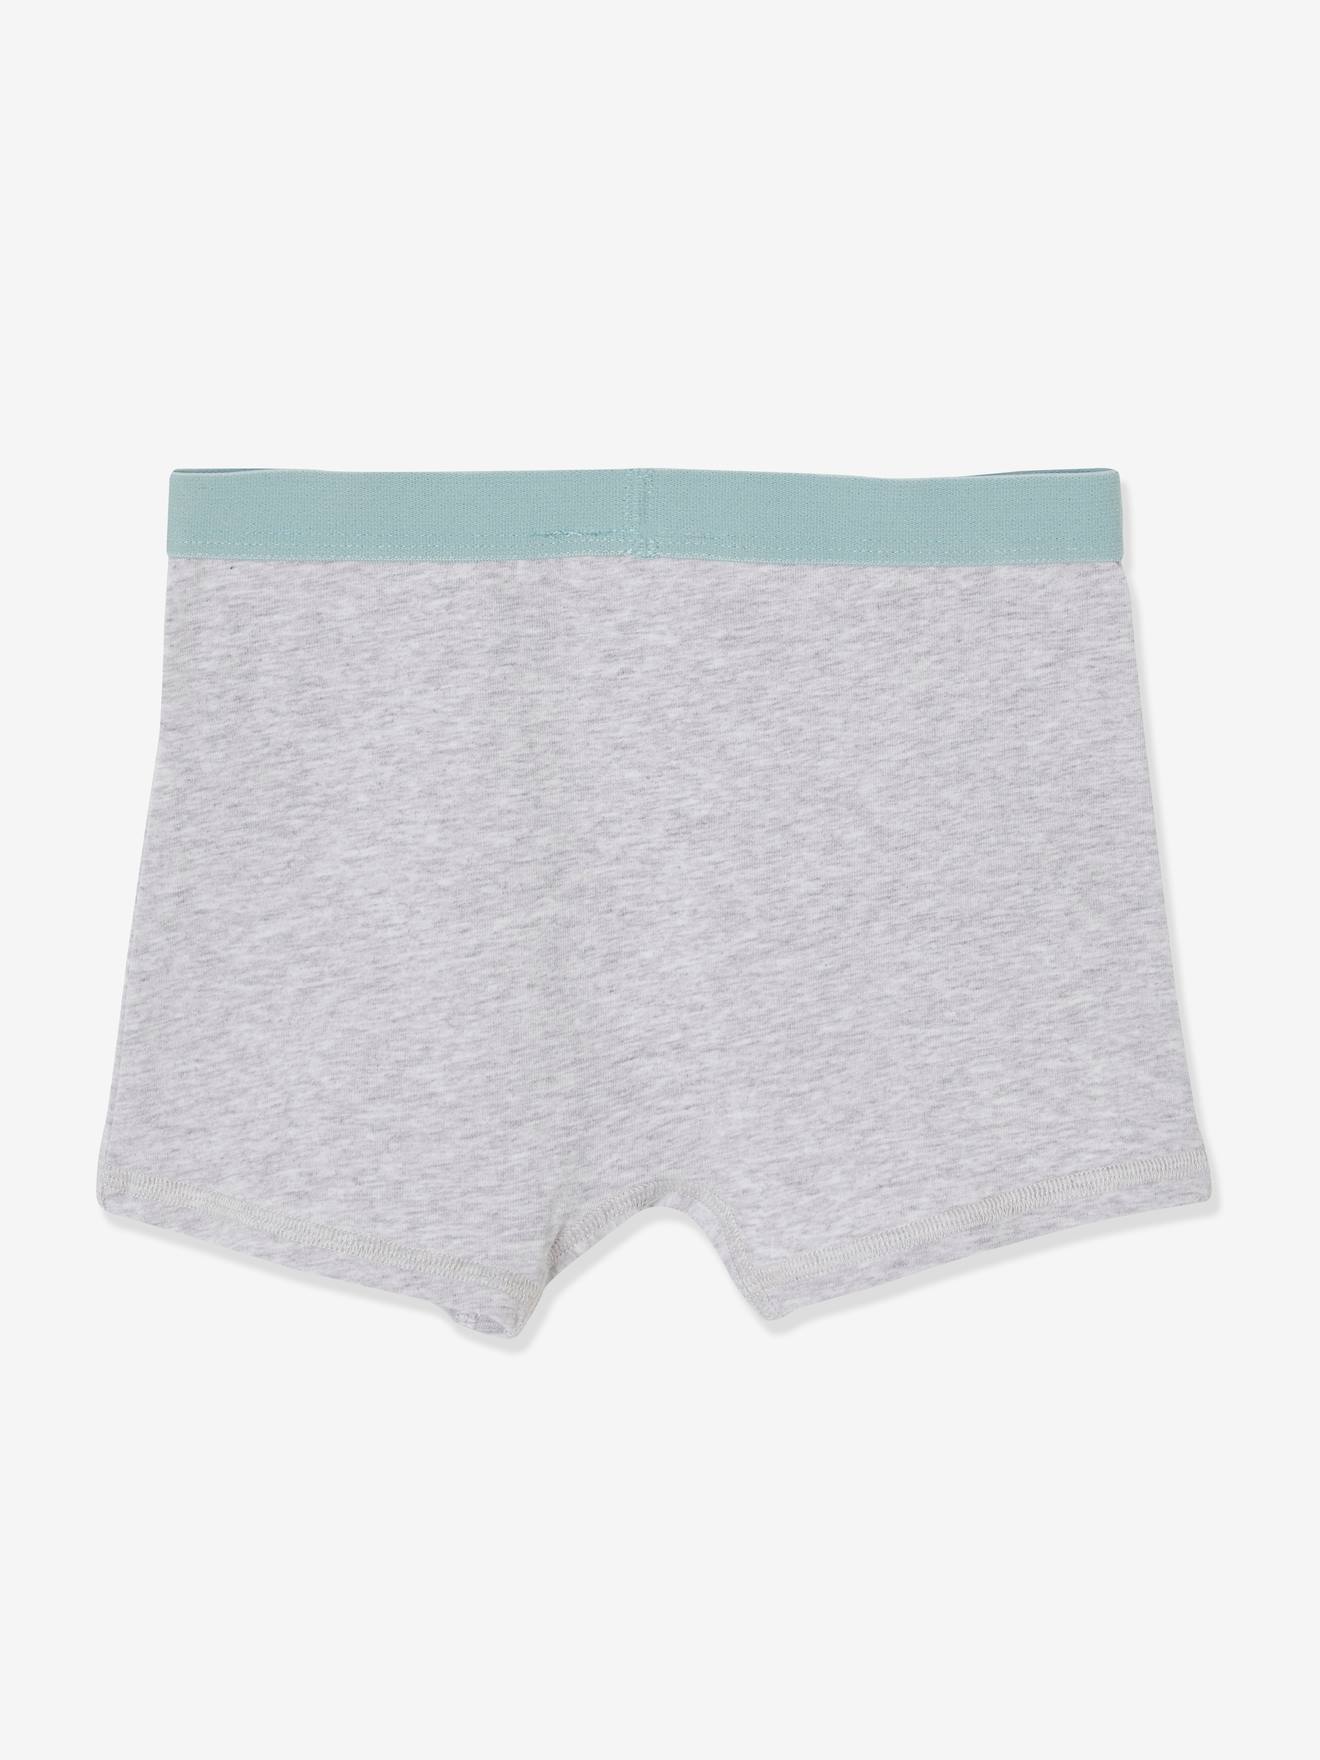 Boxers 2 pack Color light grey - SINSAY - 8004R-09M